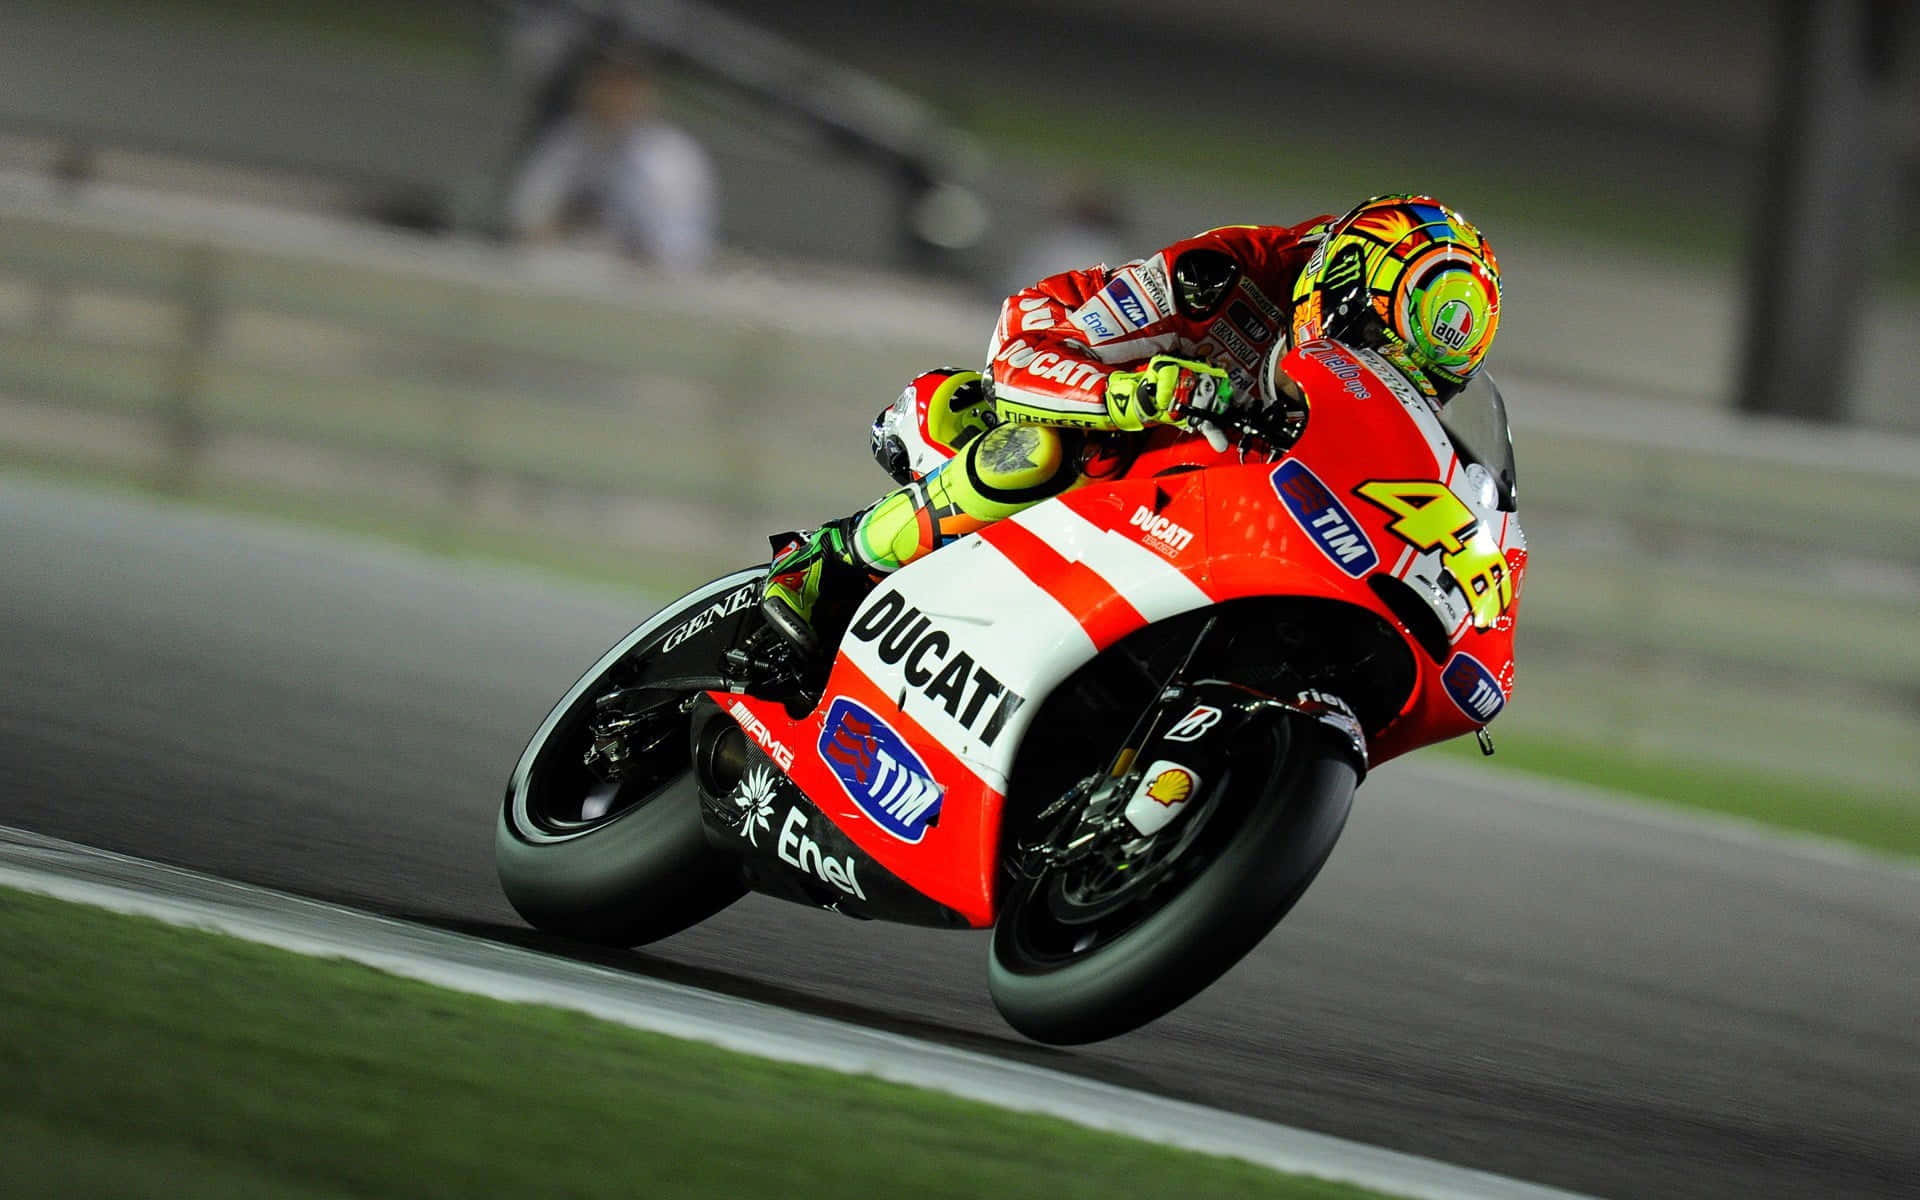 High-speed Action with VR46 at Qatar MotoGP Test Drive Wallpaper